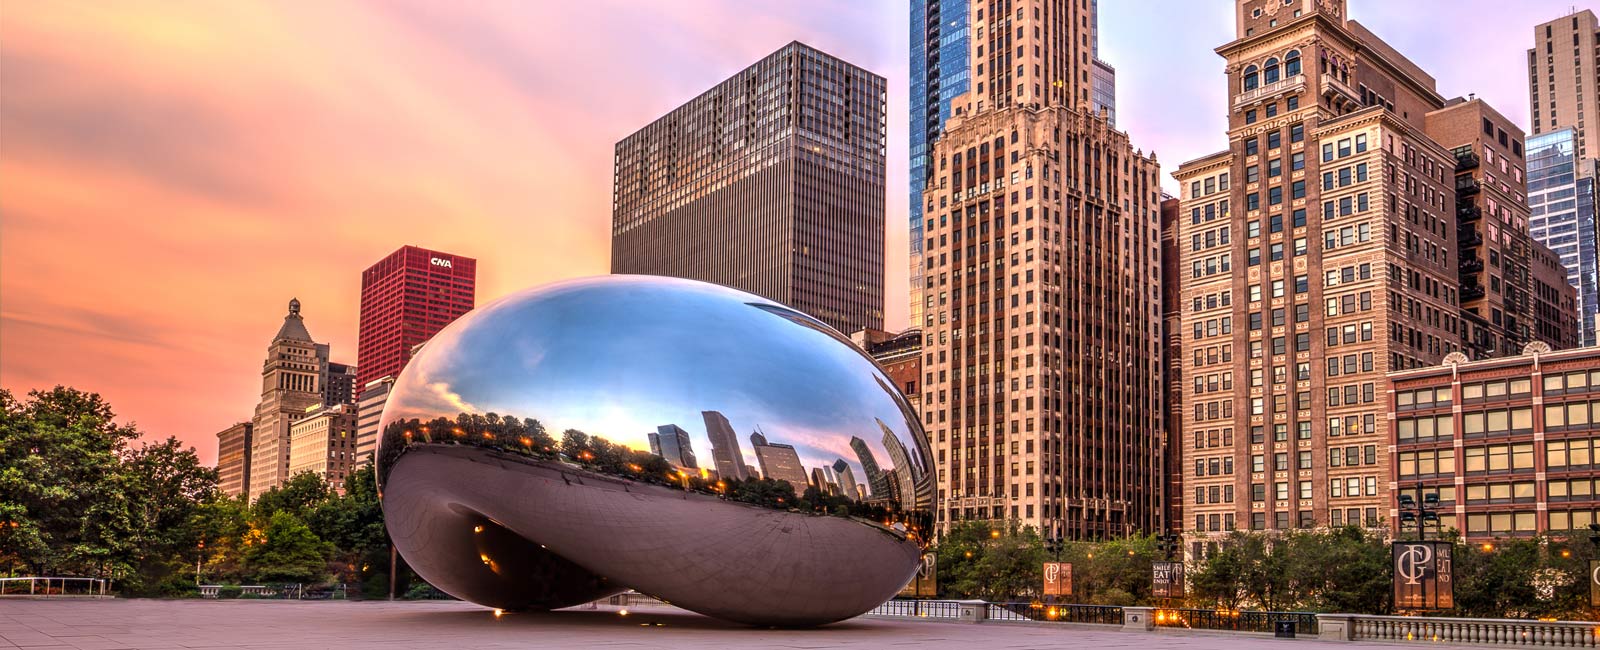 Enjoy a stroll through Millenium Park on a Chicago vacation with Hilton Grand Vacations